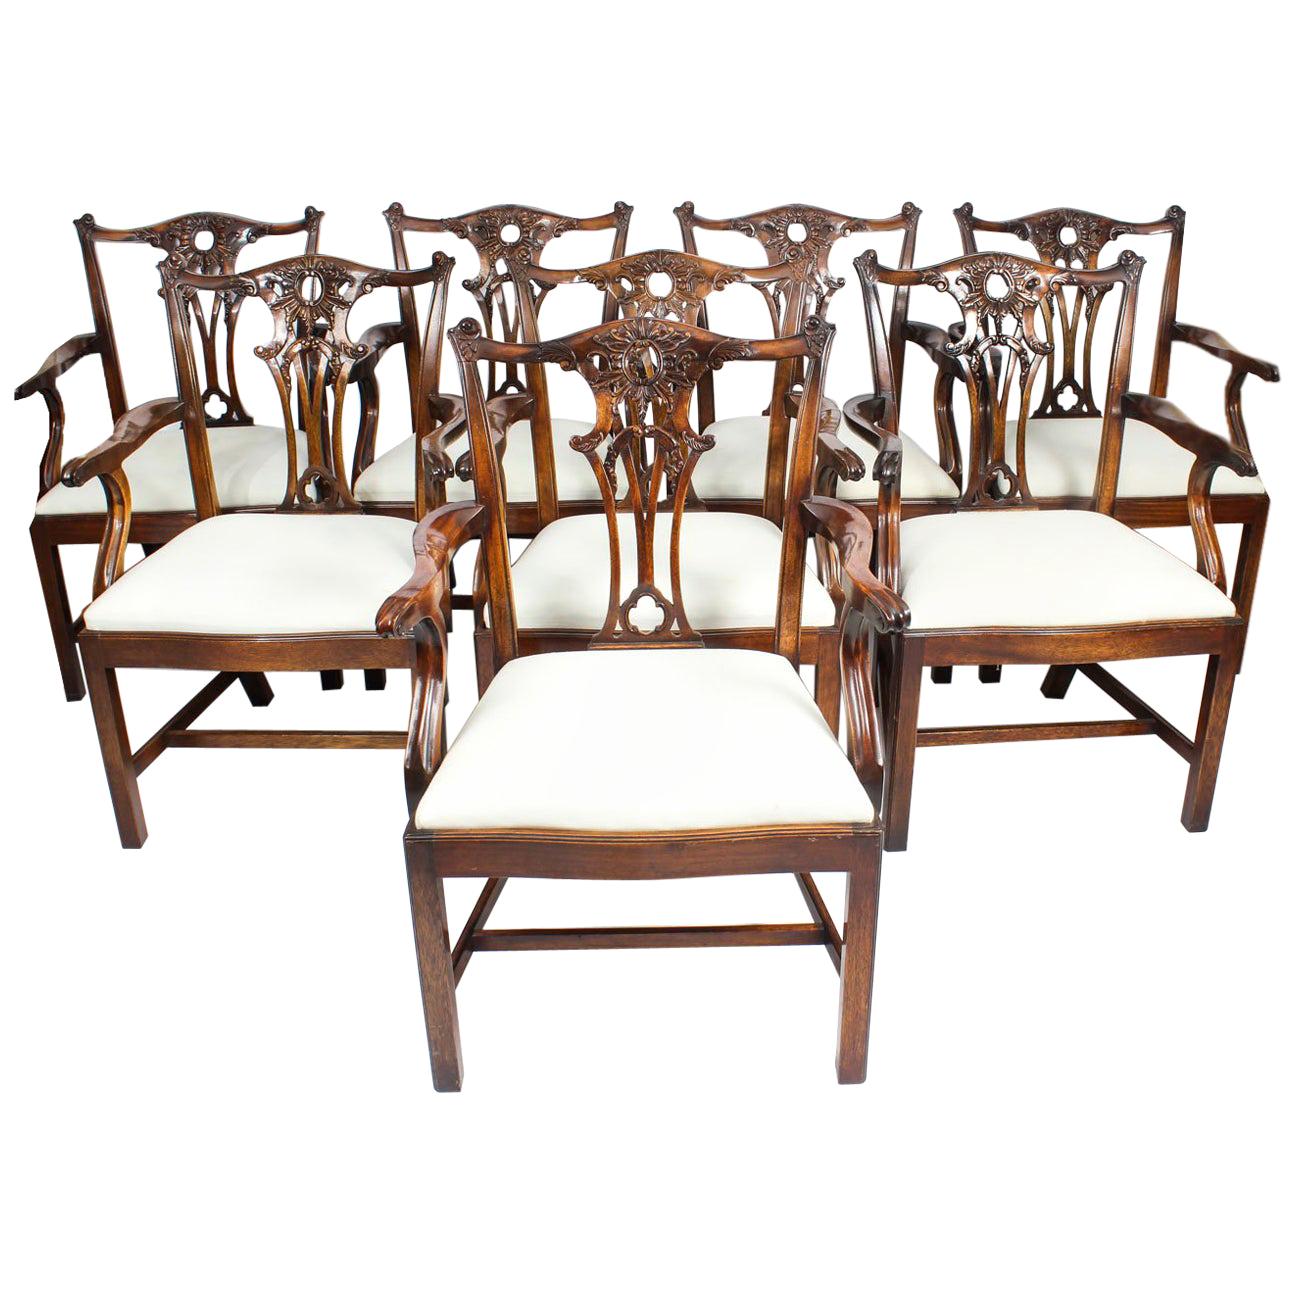 Vintage Set of 6 Mahogany Chippendale Revival Armchairs, 20th Century